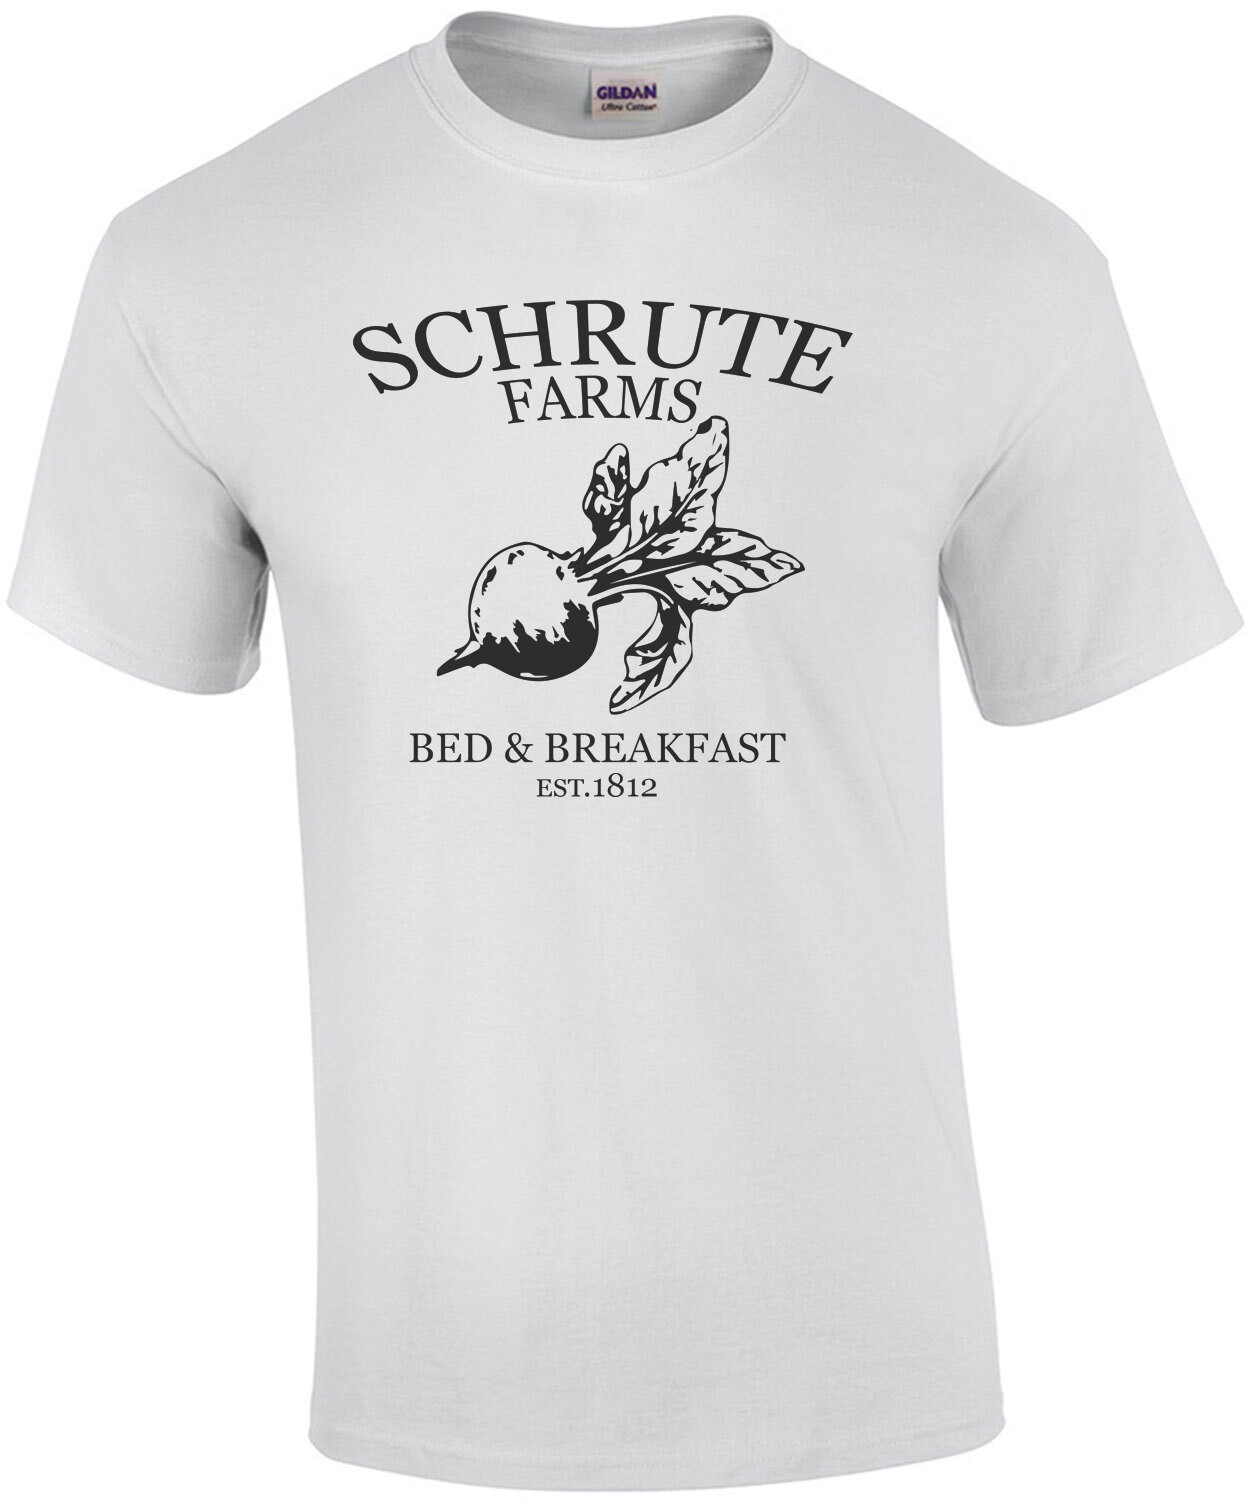 Schrute Farms - Bed & Breakfast - The Office T-Shirt